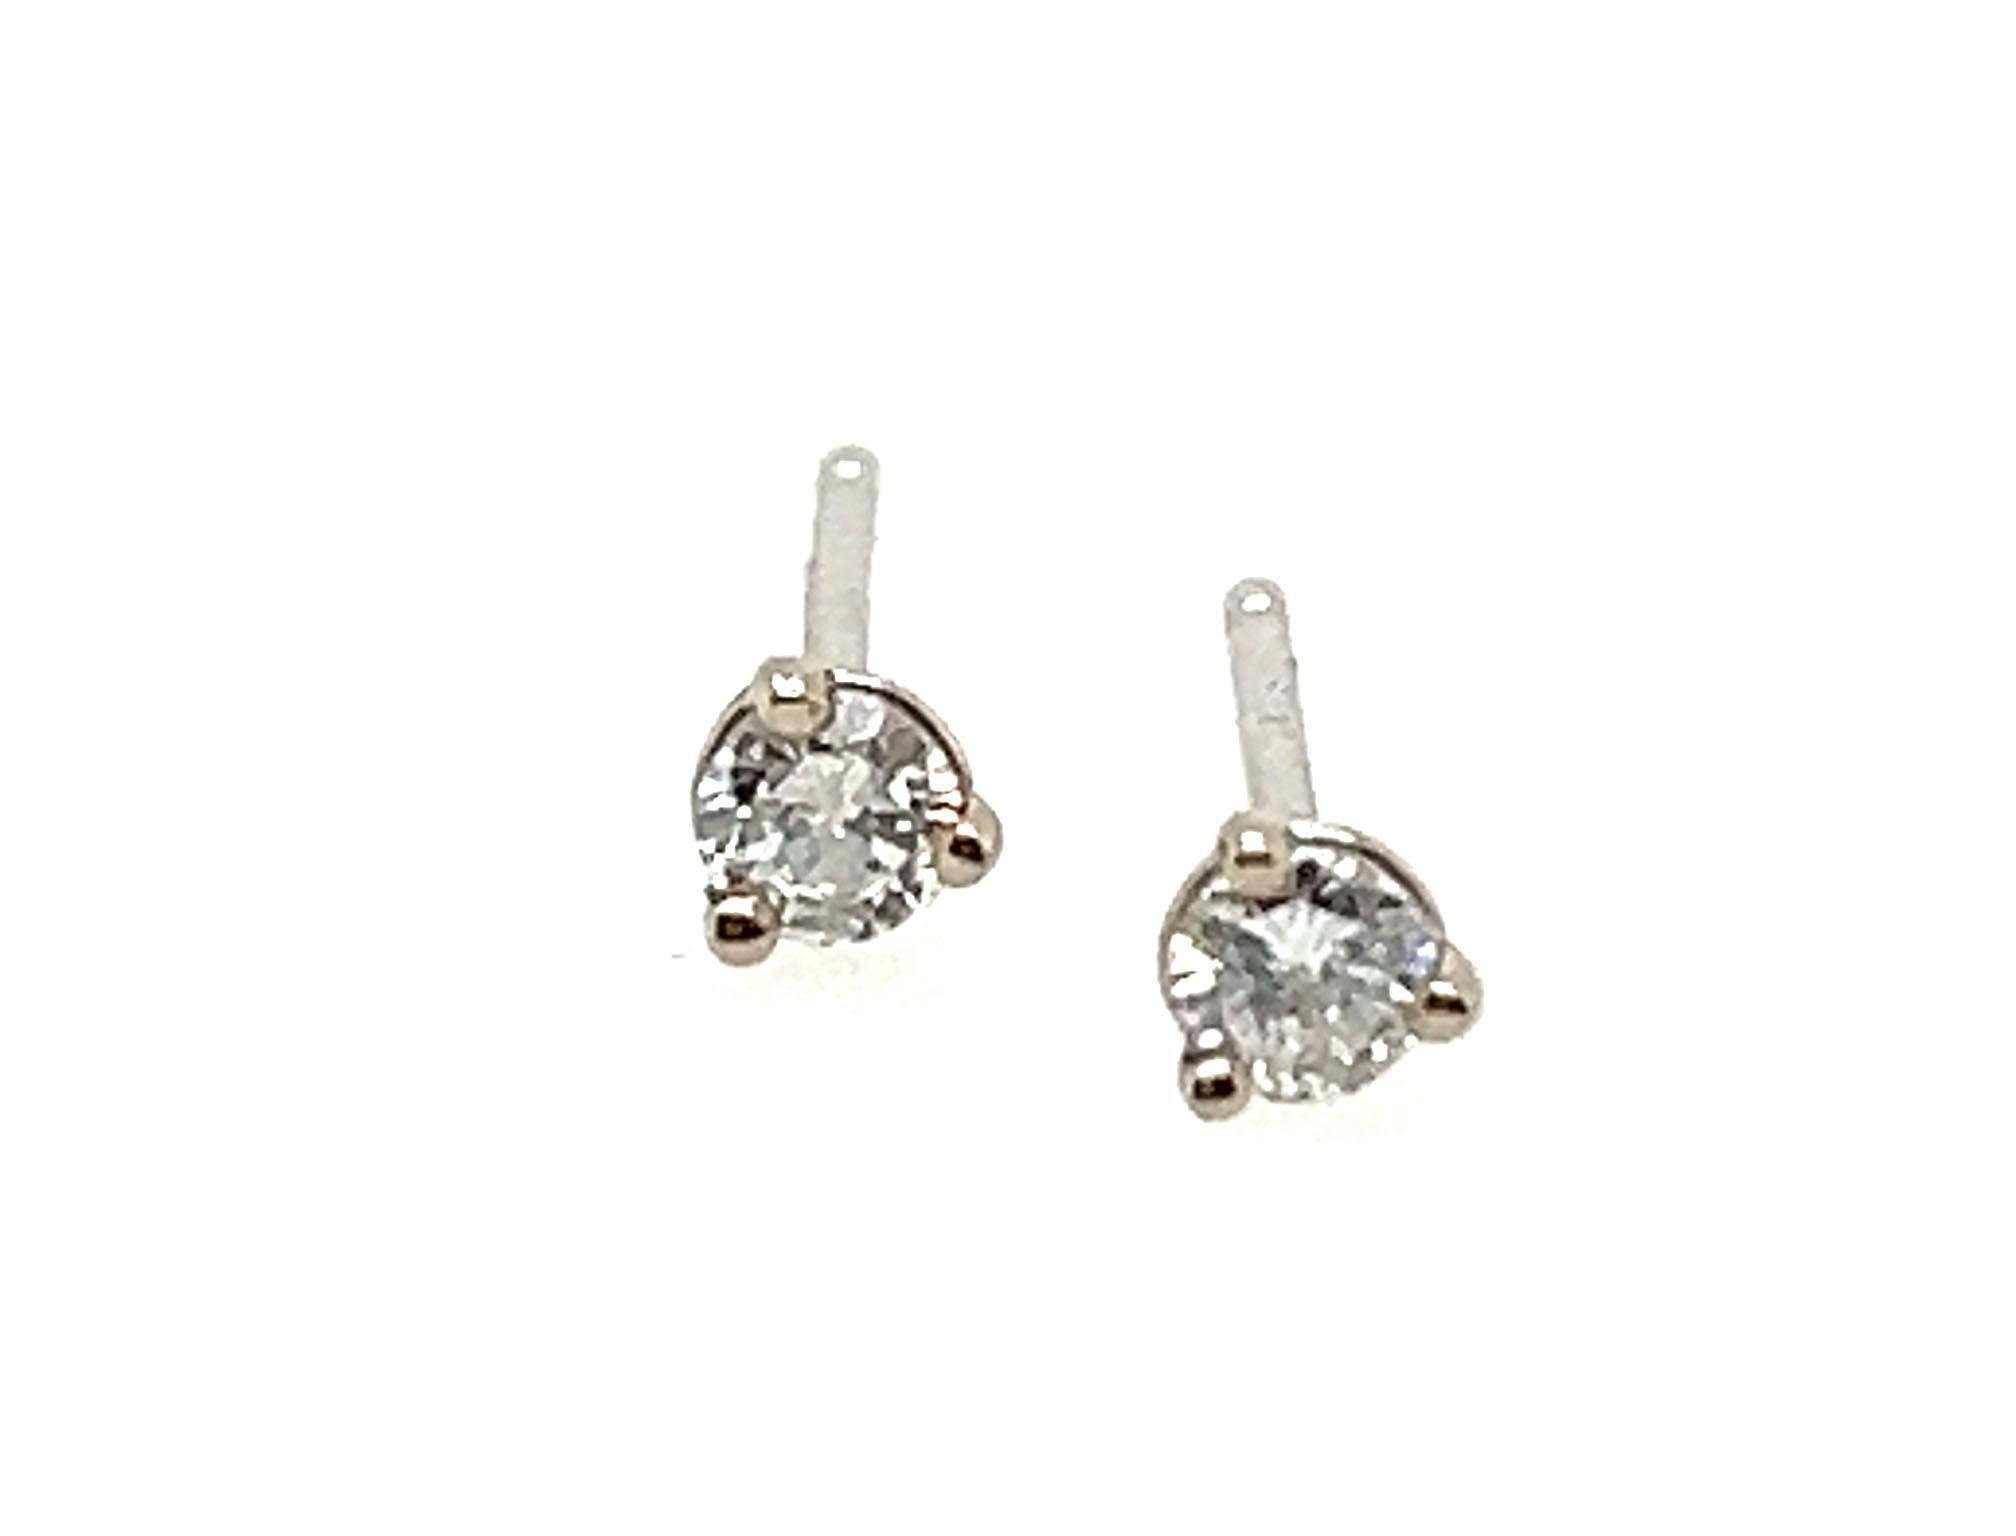 Diamond Round Brilliant Cut Stud Earrings .18ct 14K White Gold 


Features 2 Matching Natural Mined Round Brilliant Cut Diamonds 

100% Natural Mined Diamonds 

.18 Carat Diamond Weight 

Classic Diamond Studs

Solid 14K White Gold

Great